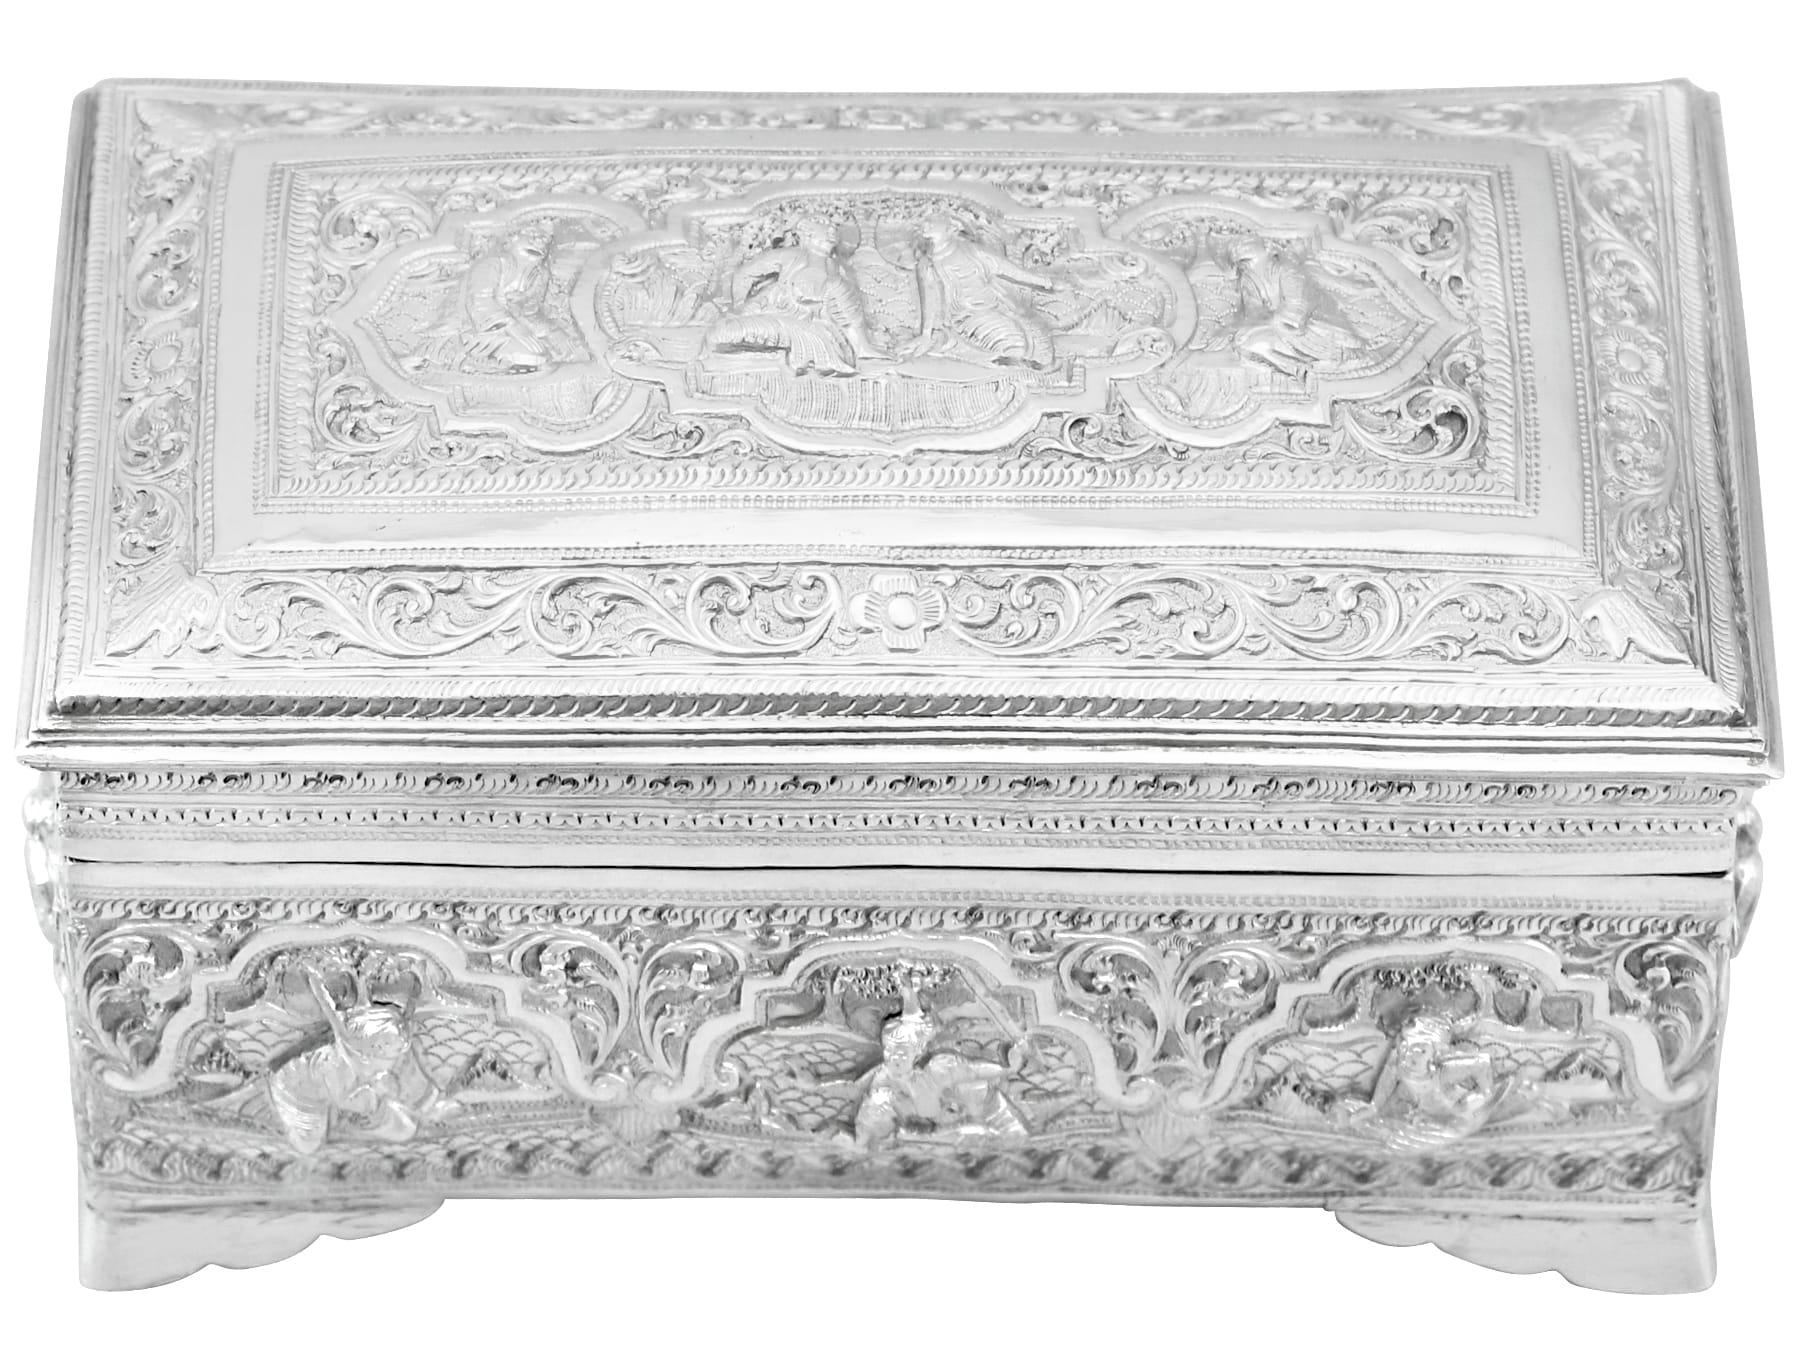 An exceptional, fine and impressive antique Burmese silver box; an addition to our diverse Asian silverware collection.

This exceptional antique Burmese silver box has a rectangular form, supported with plain bracket style feet.

The body of this